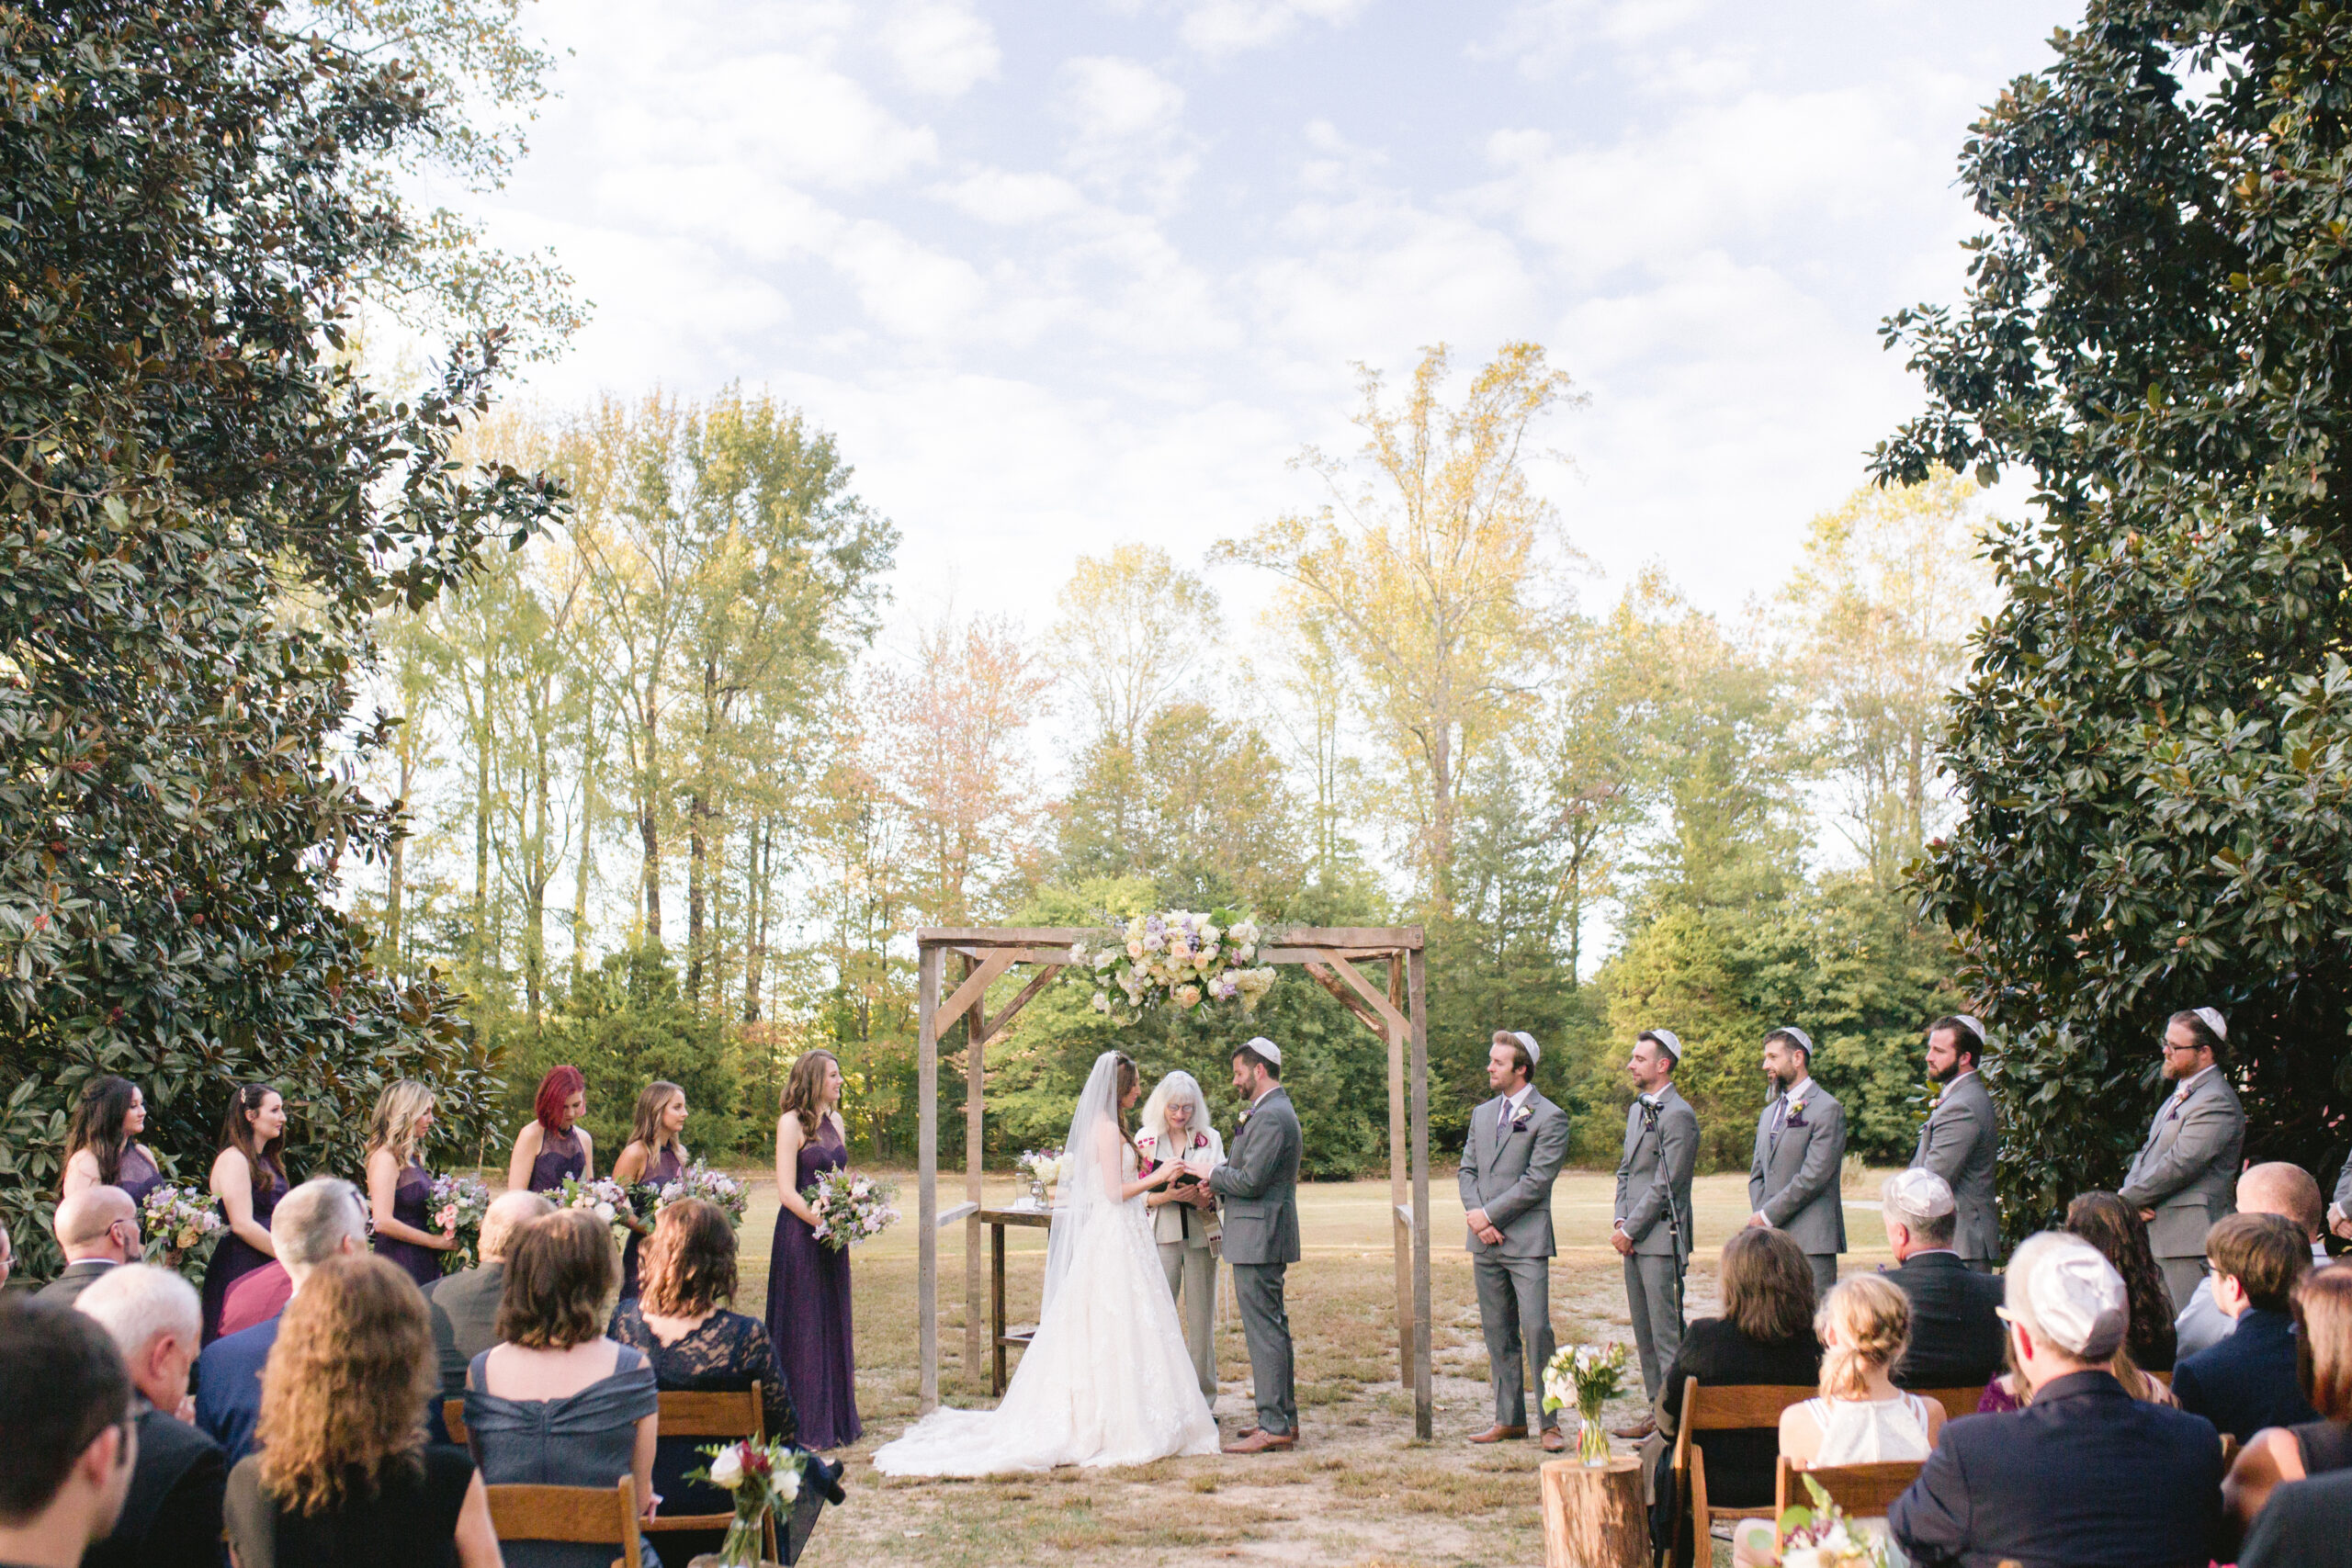 The eco-friendly wedding ceremony held outdoors, taken by Pattengale Photography